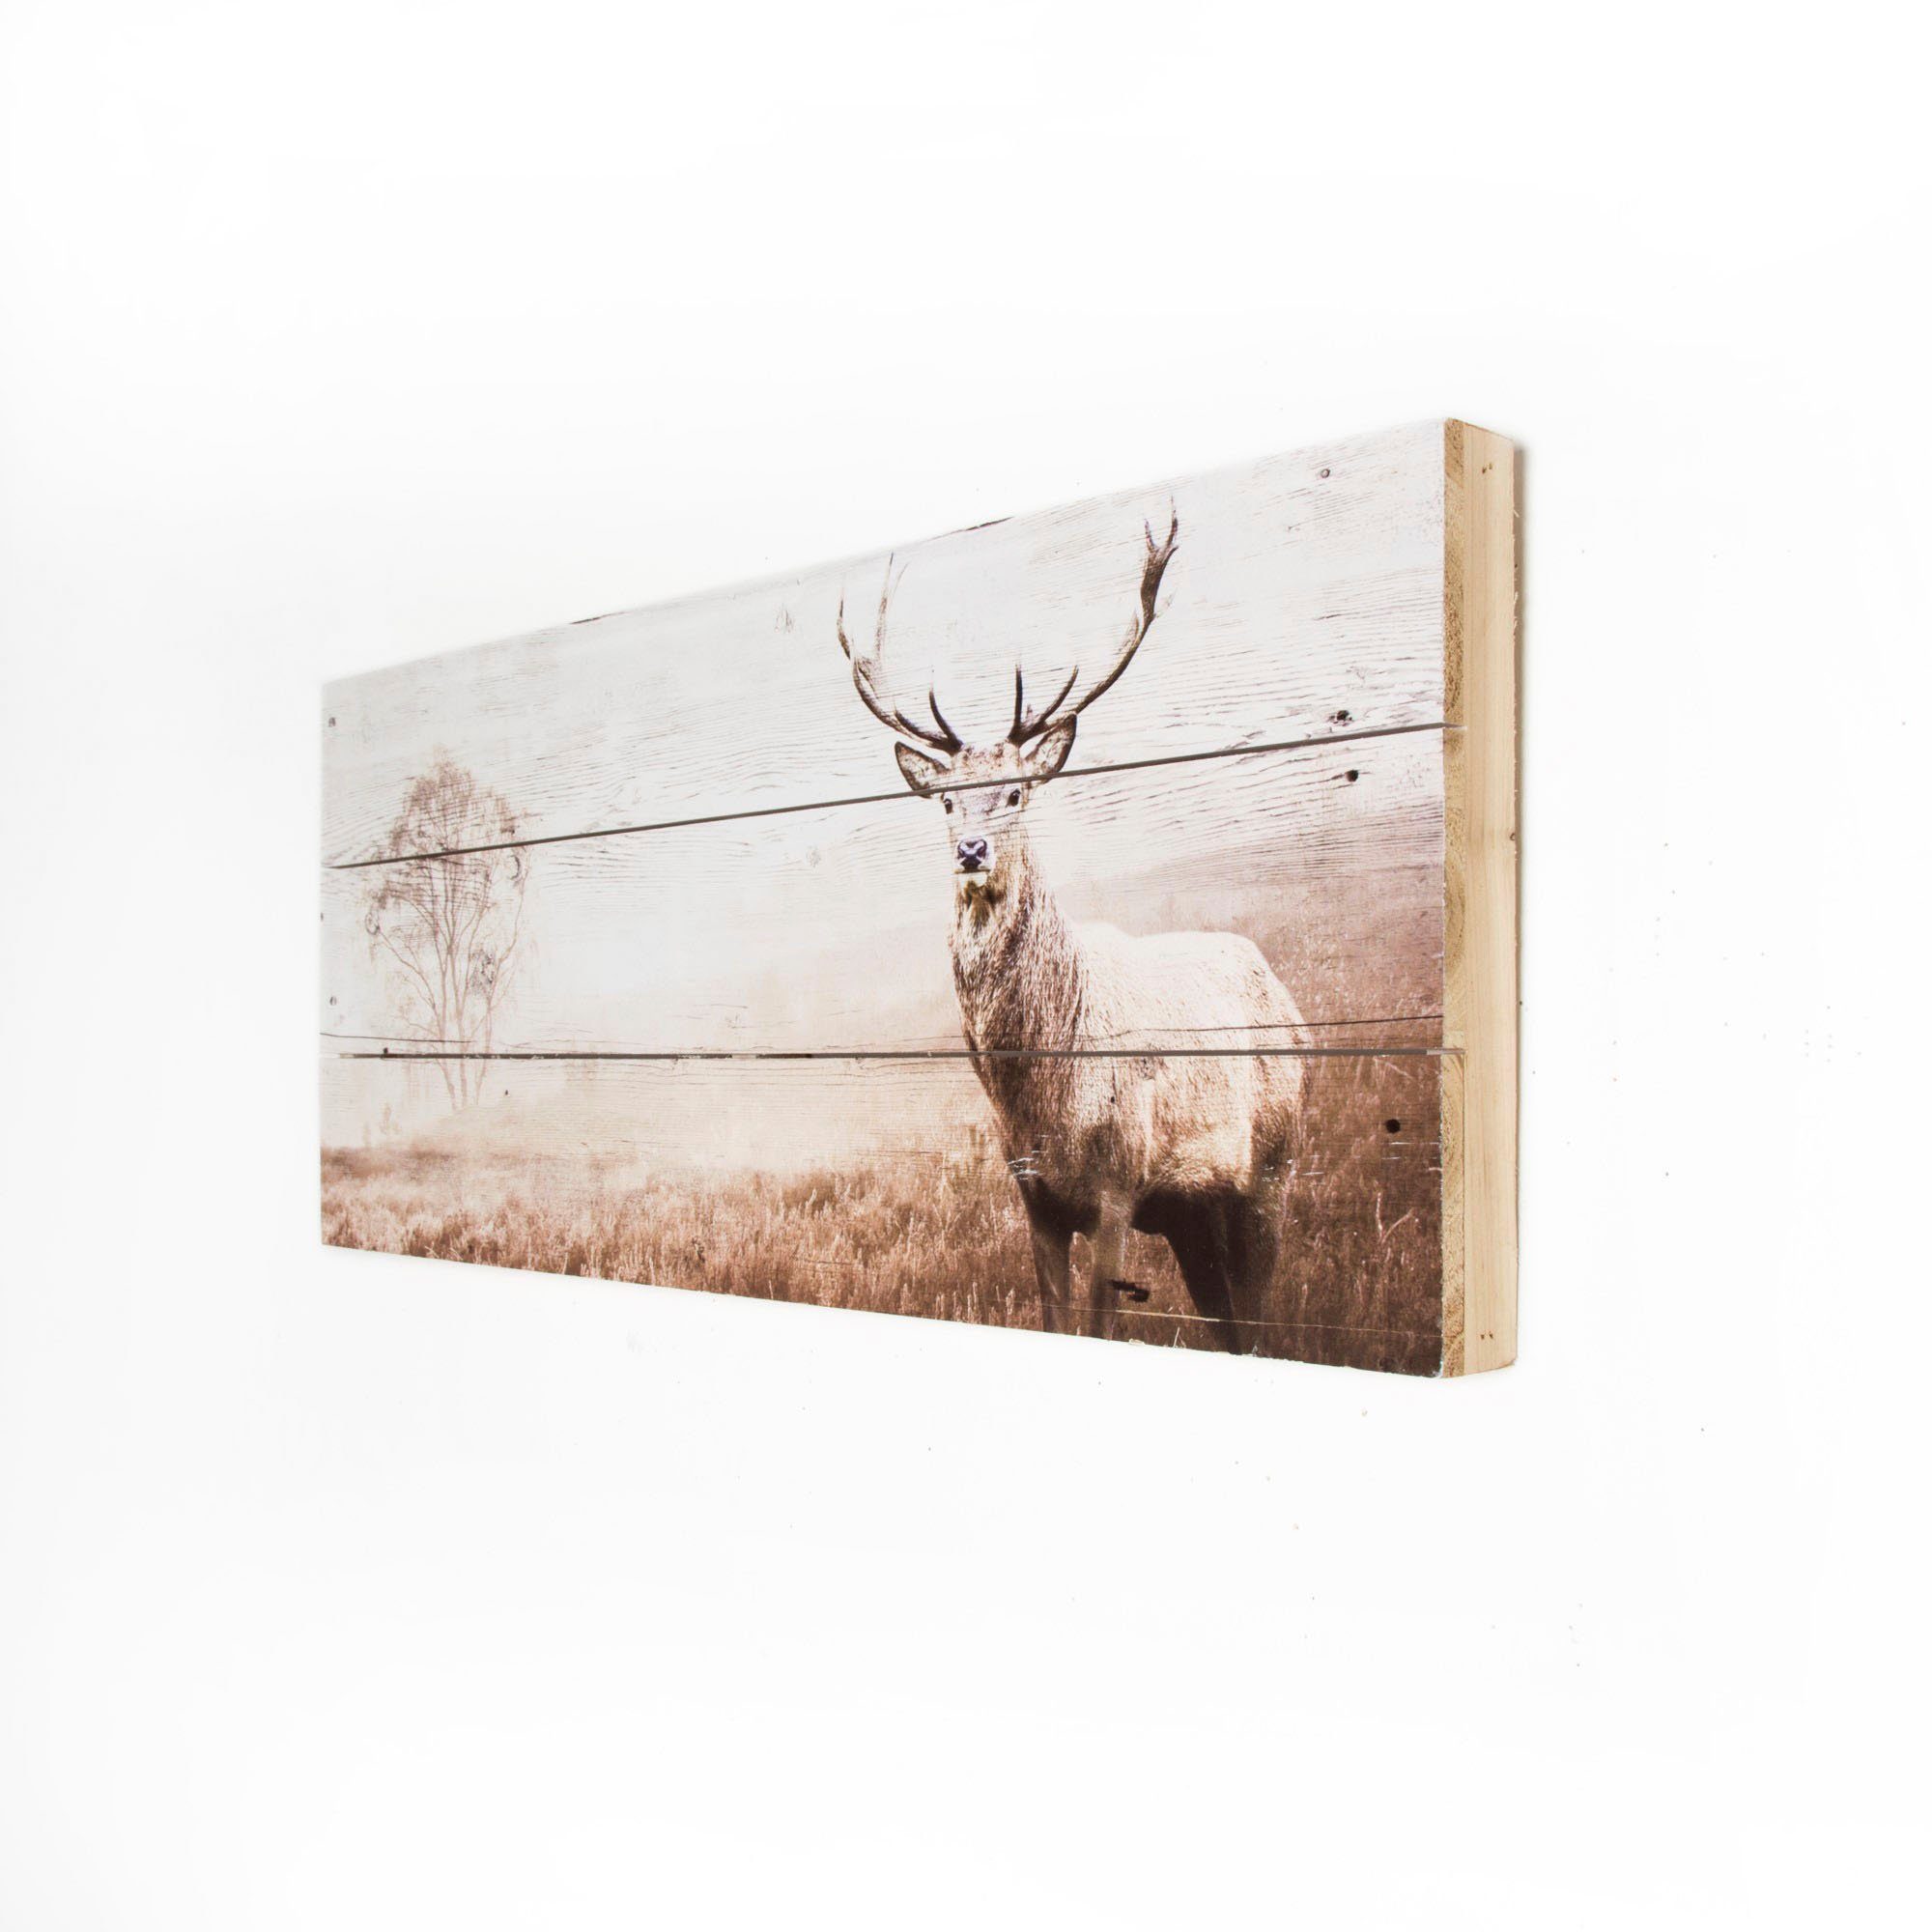 the Stag, for Hirsche Art home Holzbild